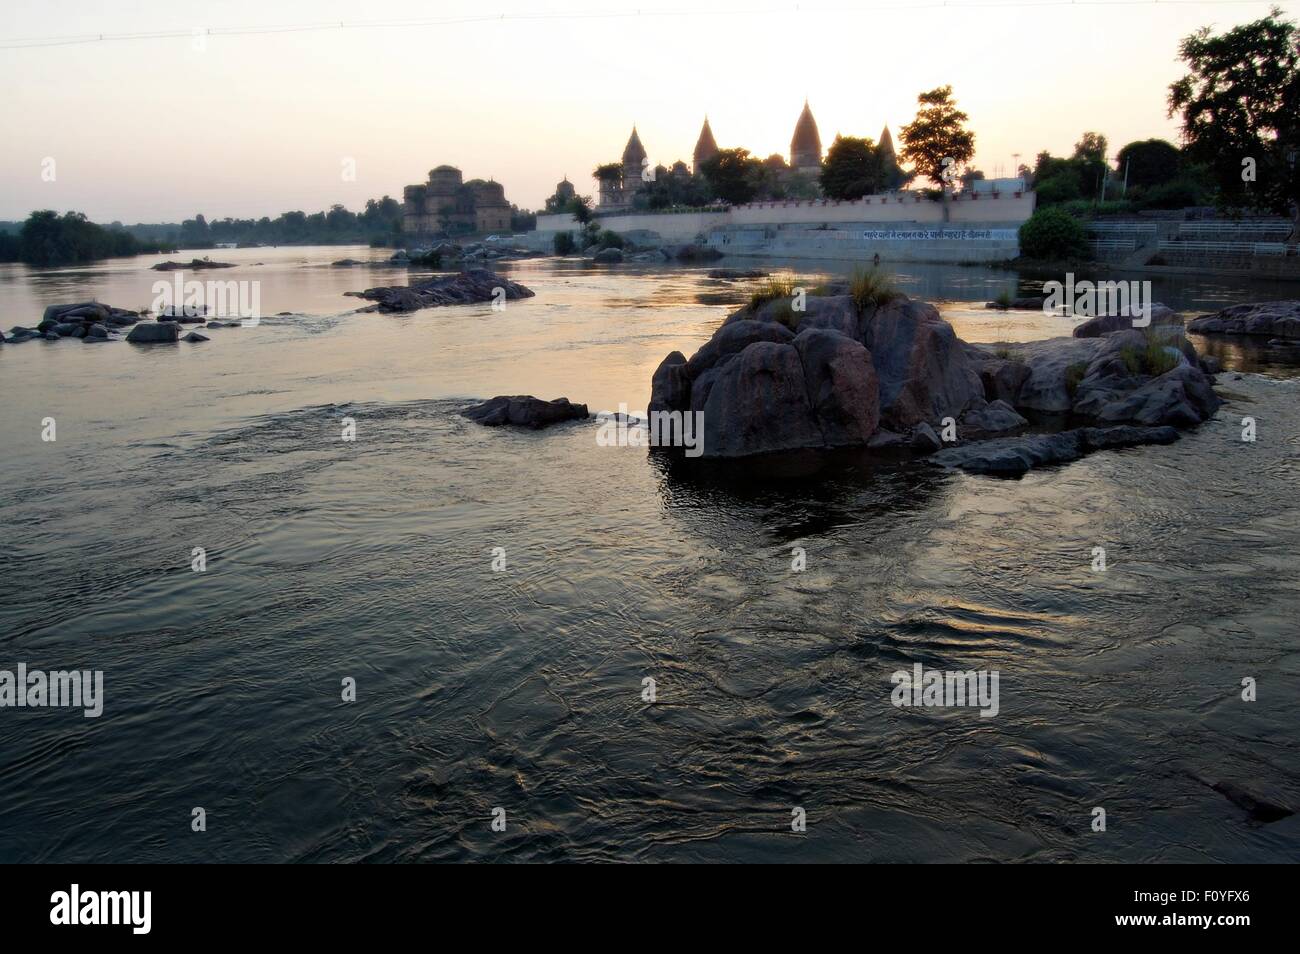 Chhatris line the River Betwa in Orchha village, Madhya Pradesh, Northern India in the Autumn evening light Stock Photo